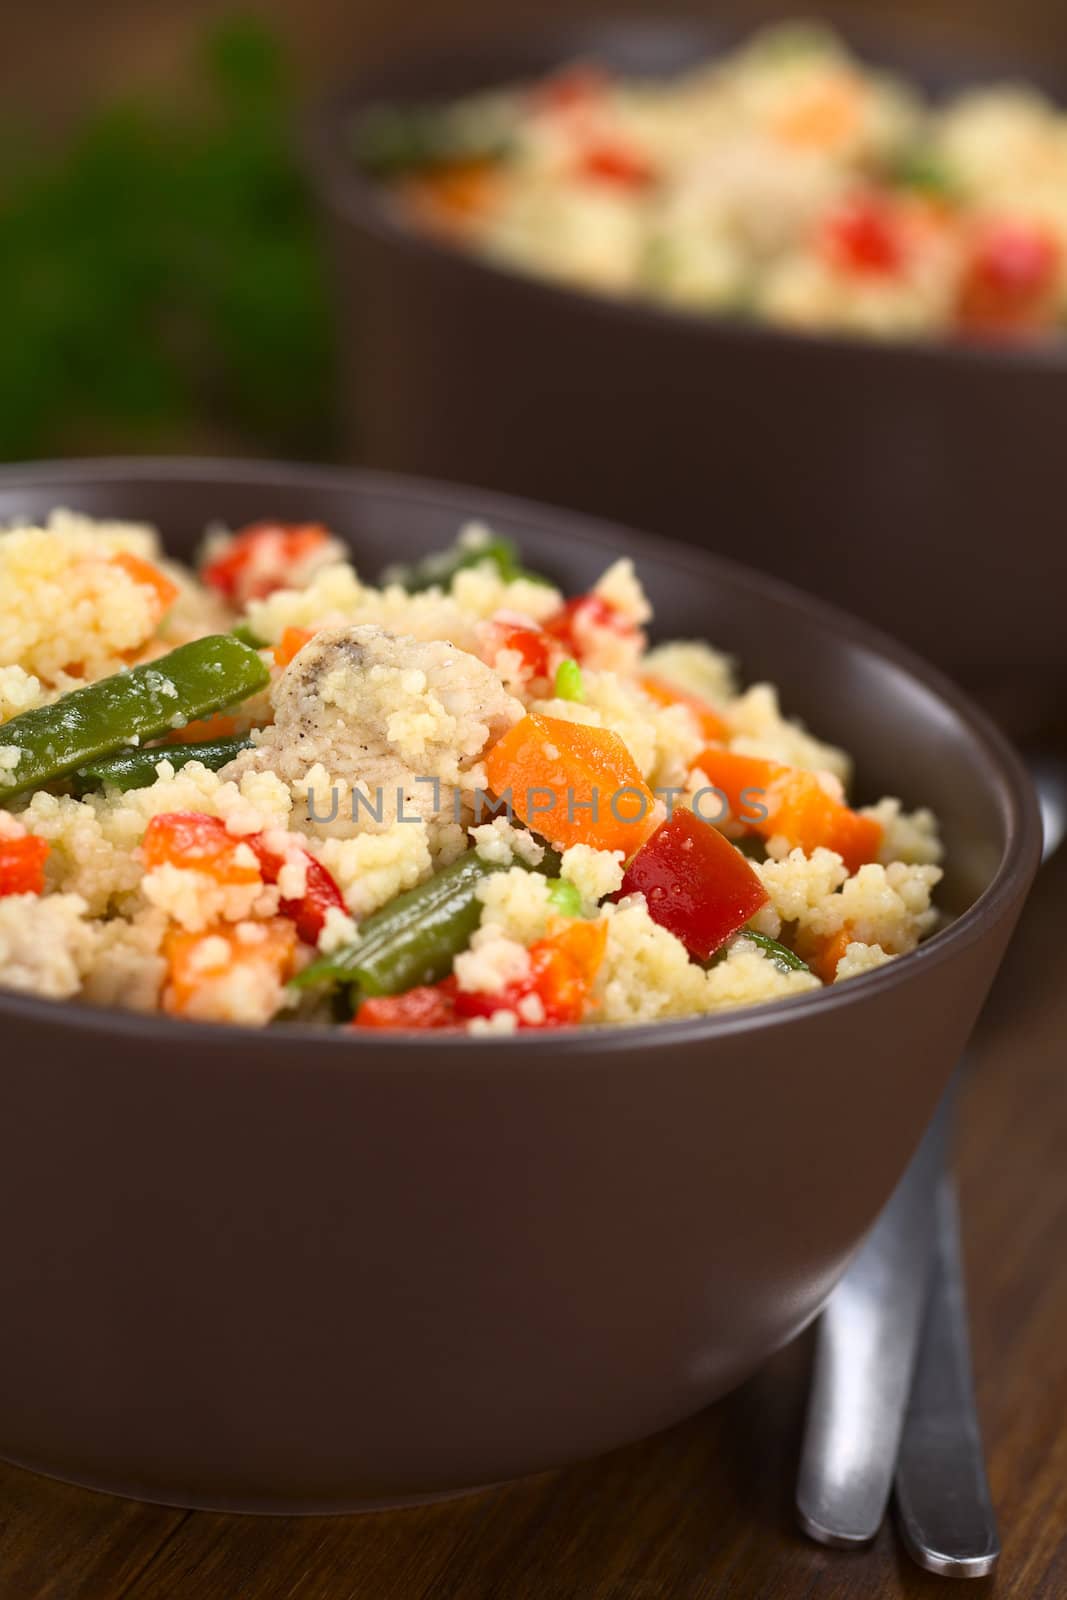 Couscous with Chicken, Green Bean, Carrot and Bell Pepper by ildi